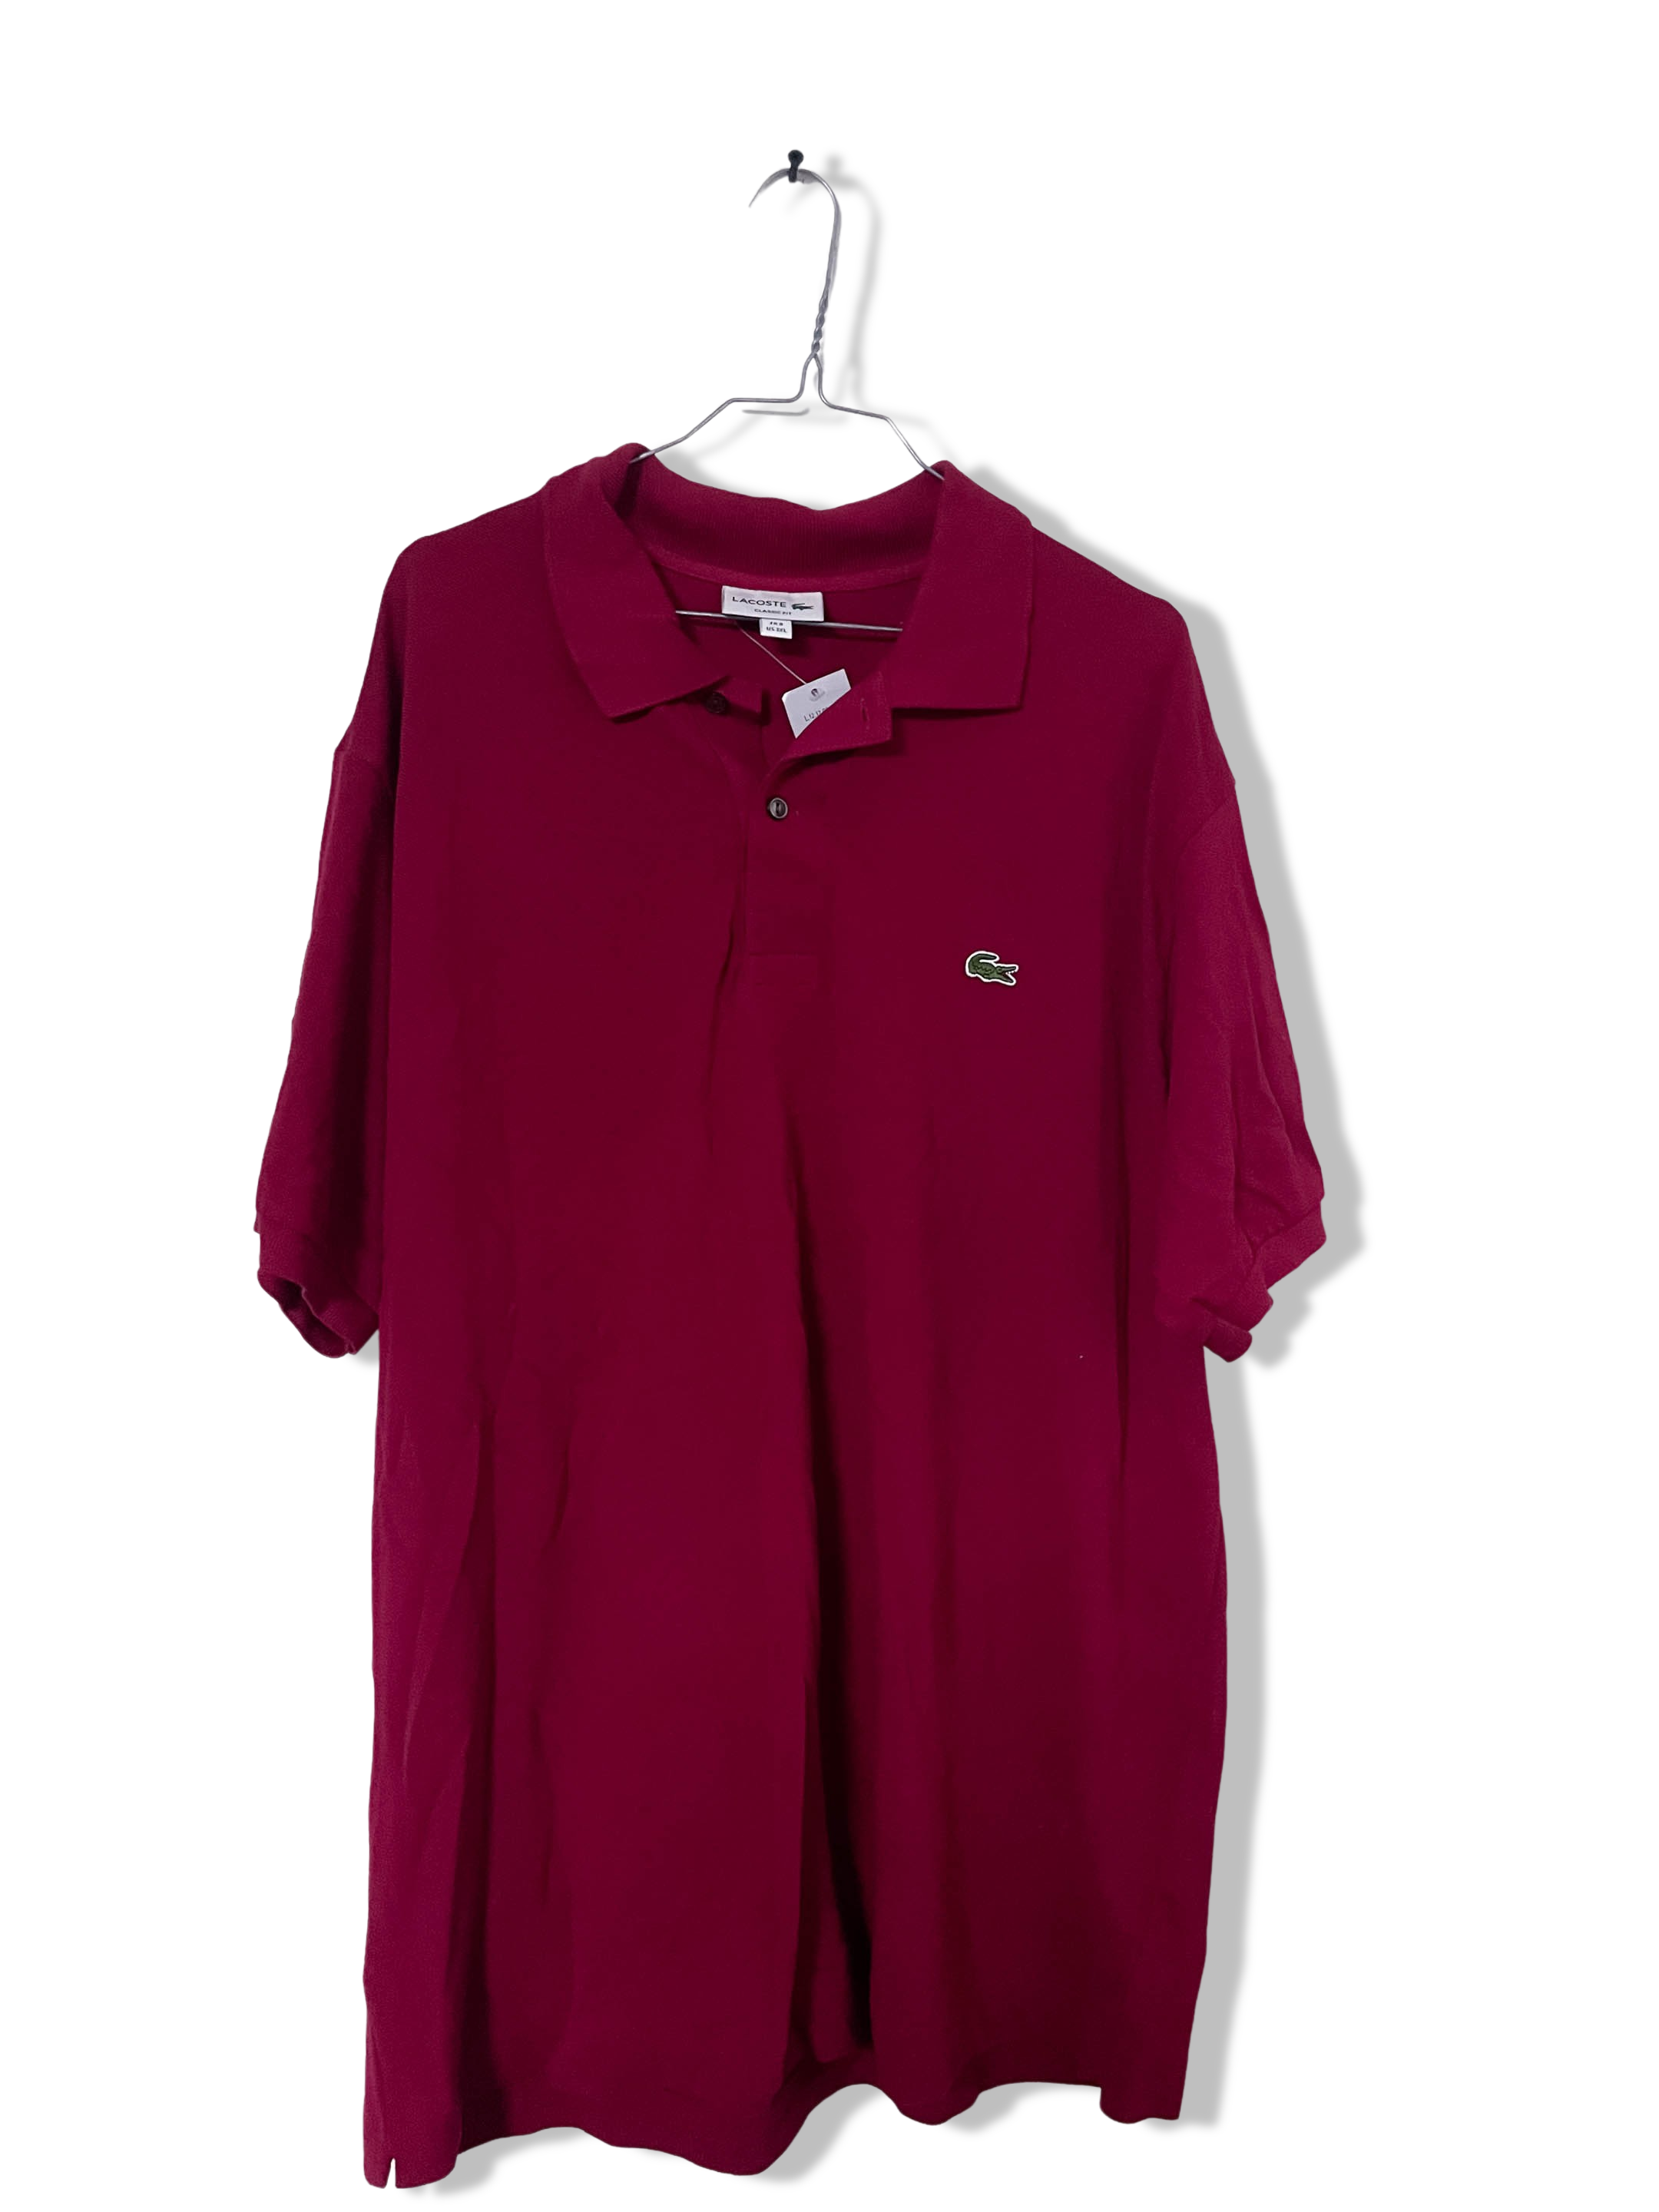 New Lacoste classic fit mens red polo shirt XXXL with tag